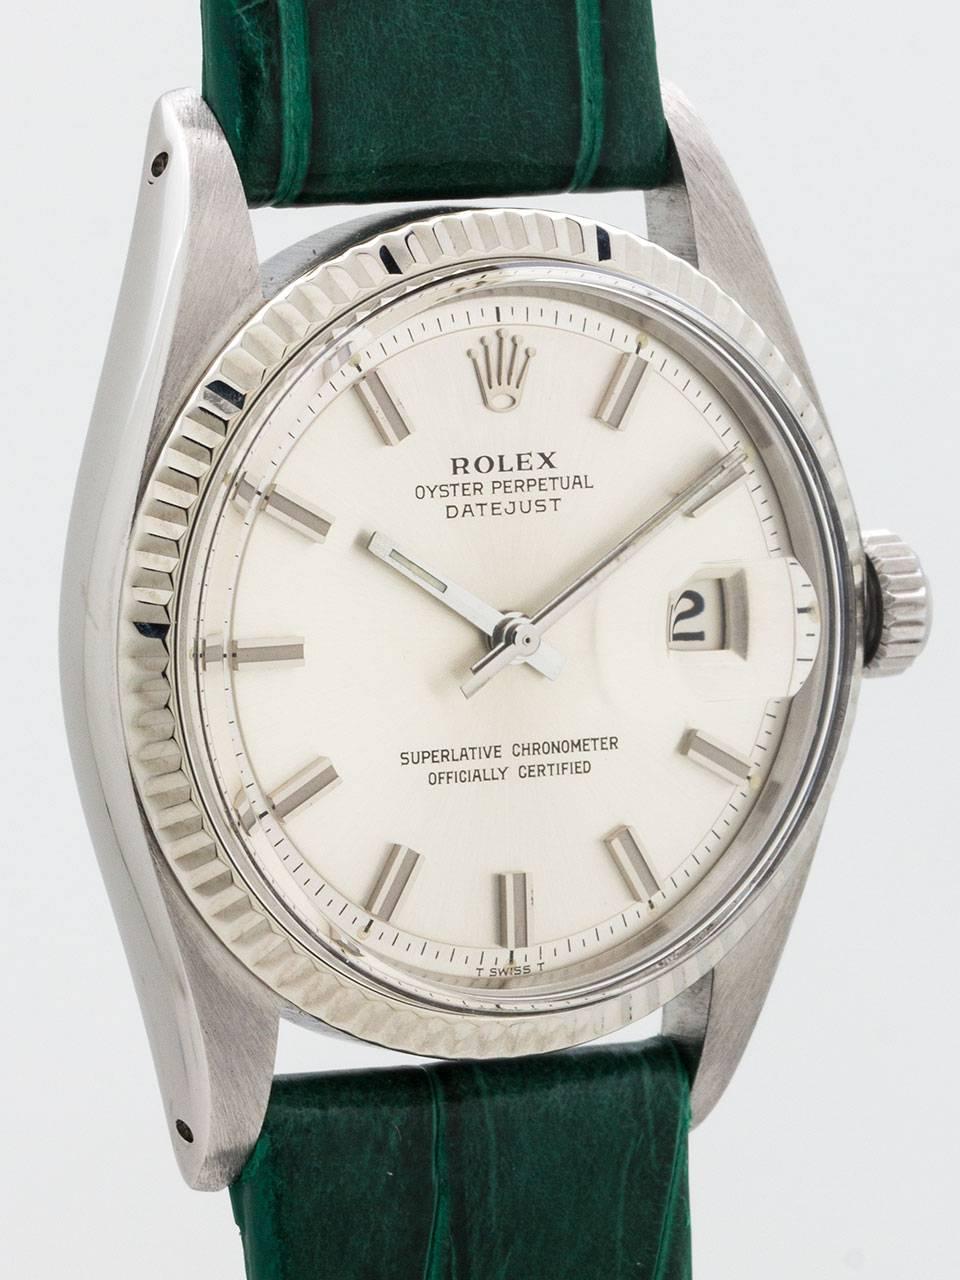 Vintage Rolex Datejust ref 1601 serial number  3.7 million circa 1974. Featuring 36mm diameter stainless steel case with 14K white gold fluted bezel and acrylic crystal. Original silver satin “Fat Boy” pie pan dial. This original dial features wide